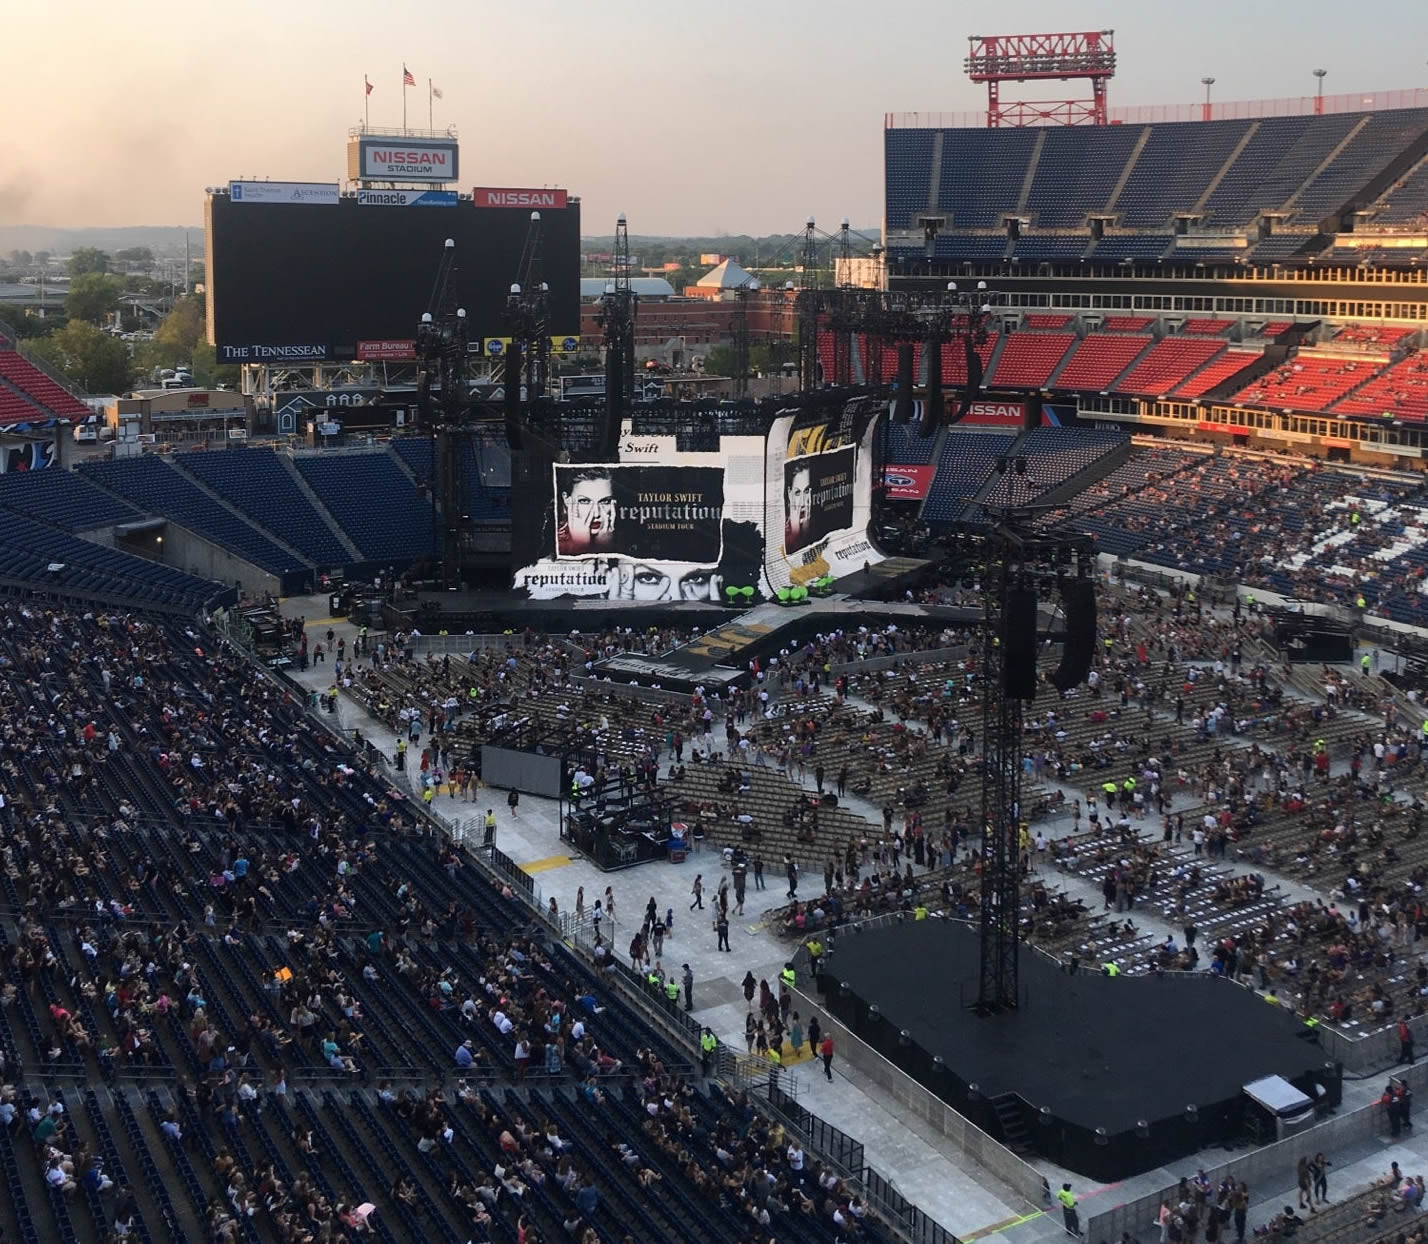 section 326 seat view  for concert - nissan stadium